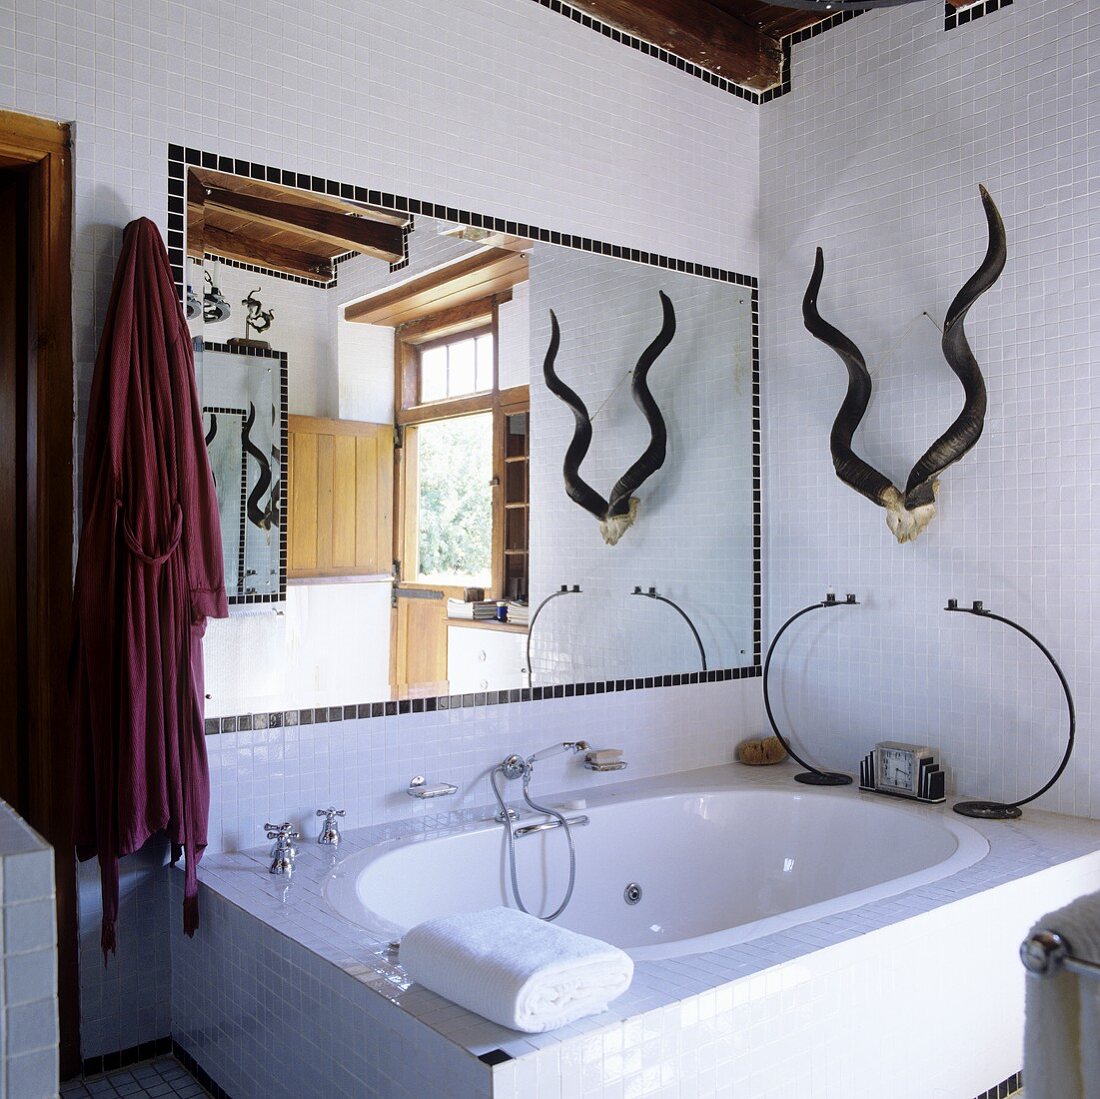 A bathroom in a South African country house with a bathtub and a mirror in front of white mosaic-tiled wall